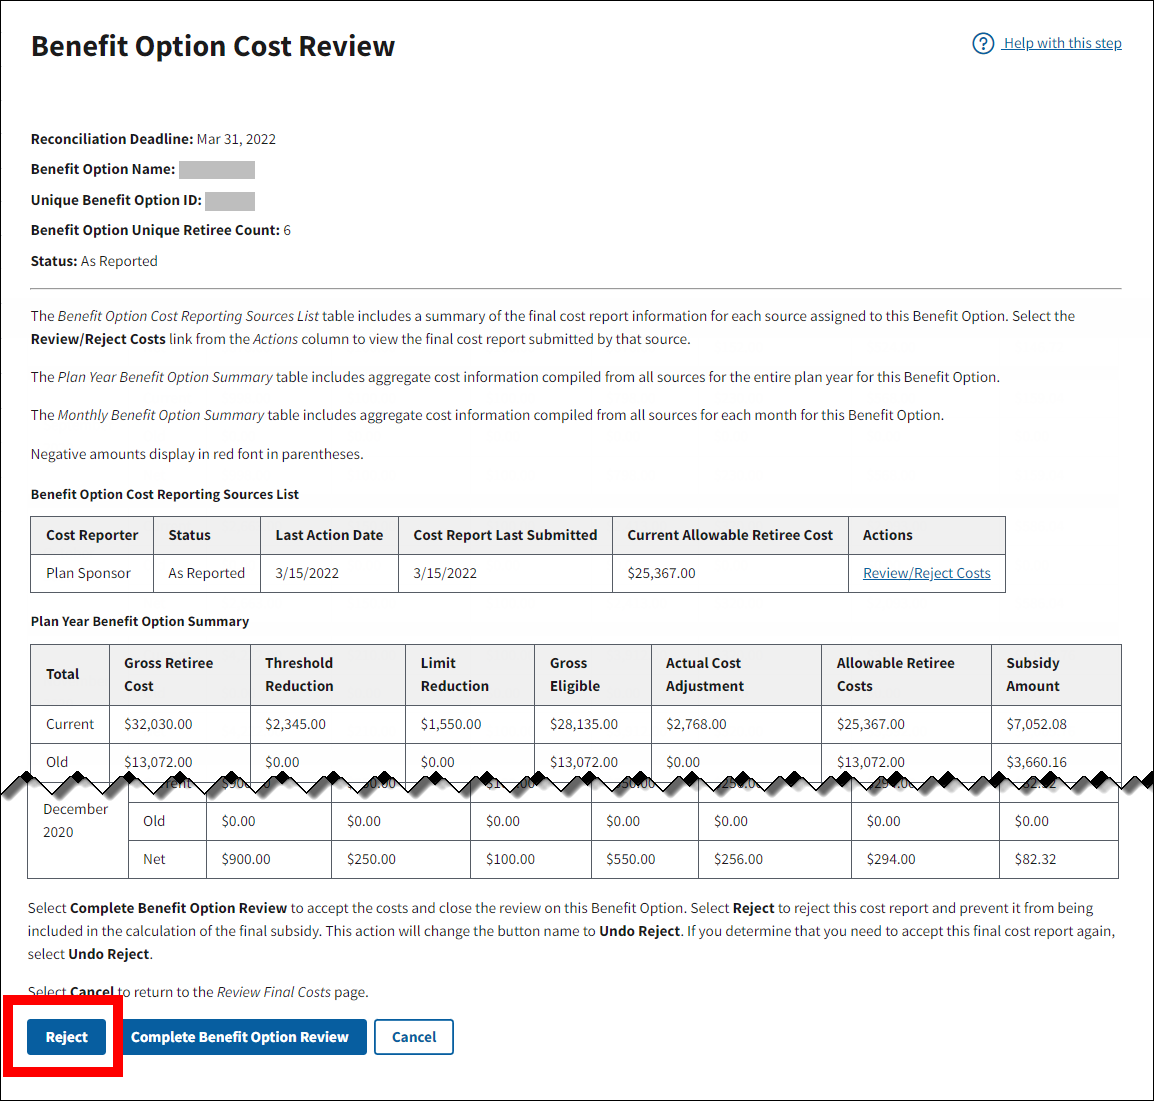 Benefit Option Cost Review page with sample data. Reject button is highlighted.